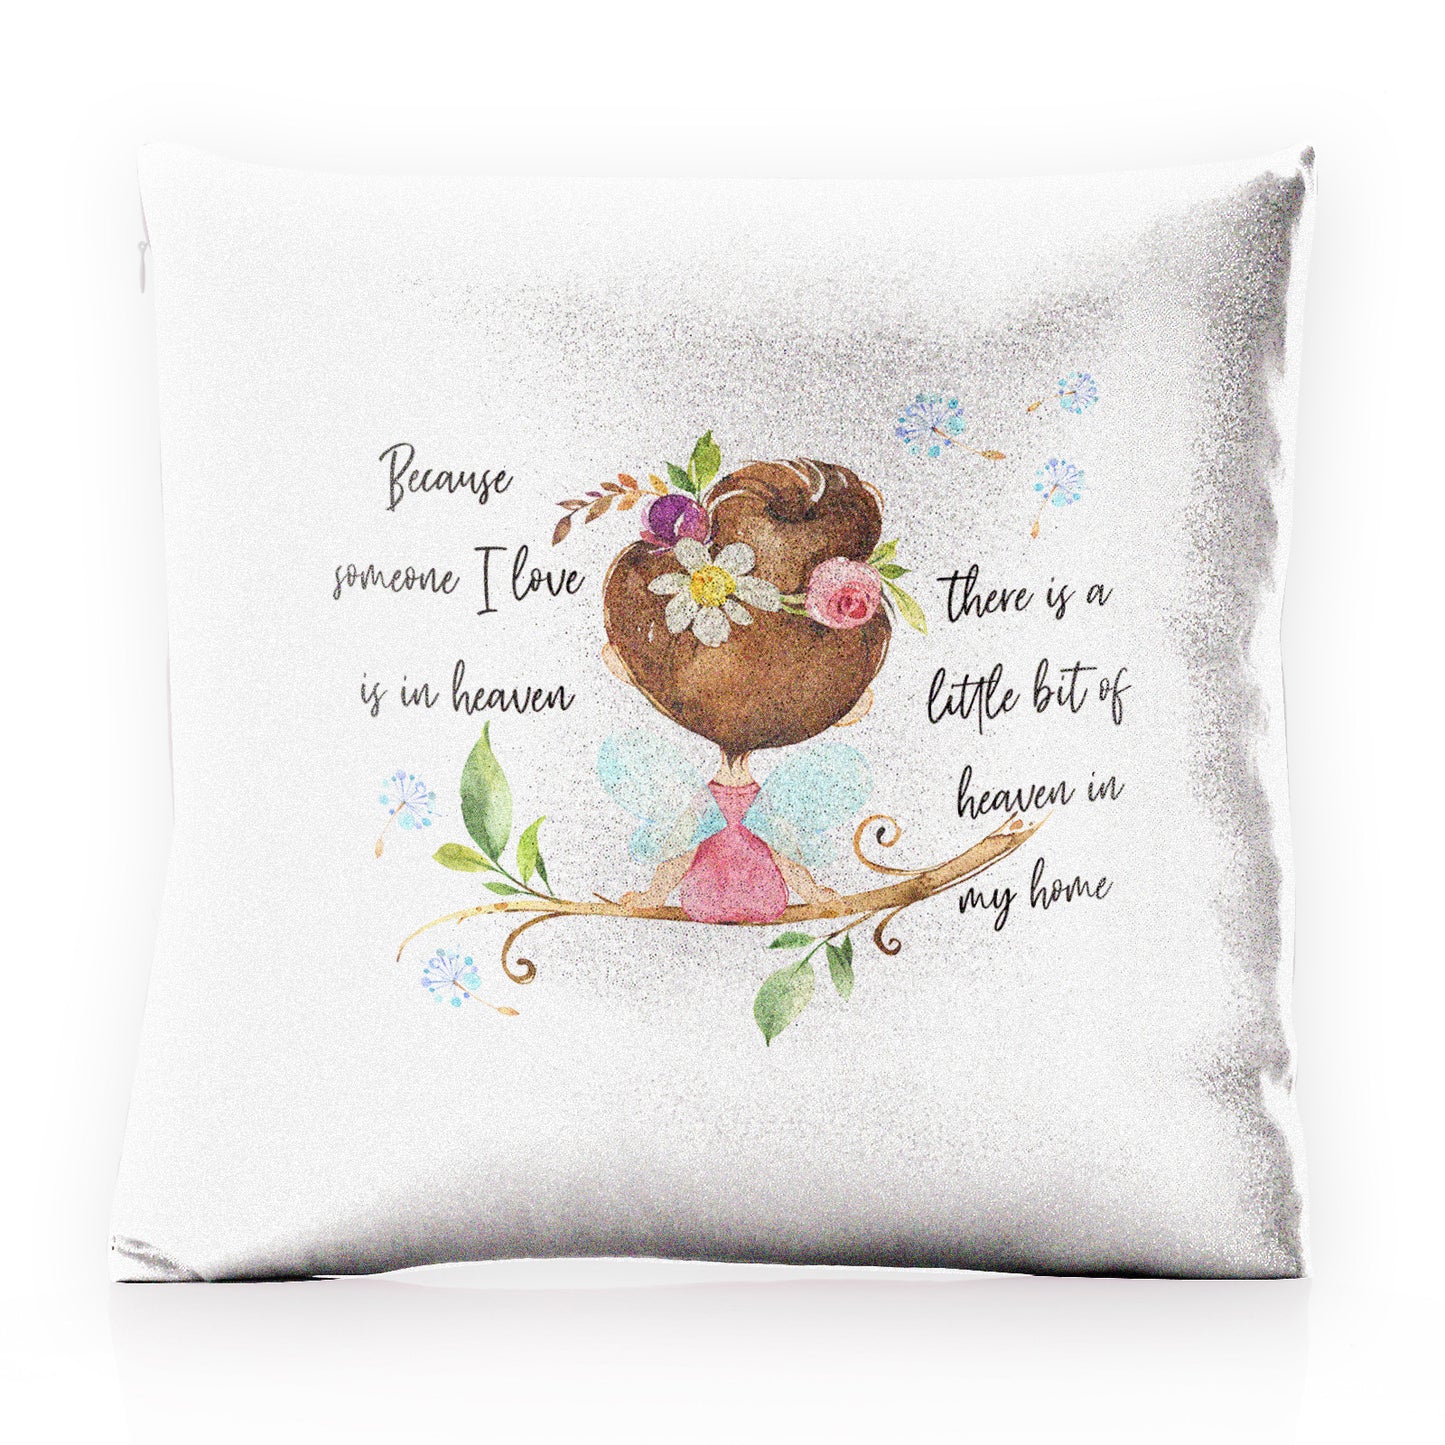 Personalised Glitter Cushion with Heaven Love Message